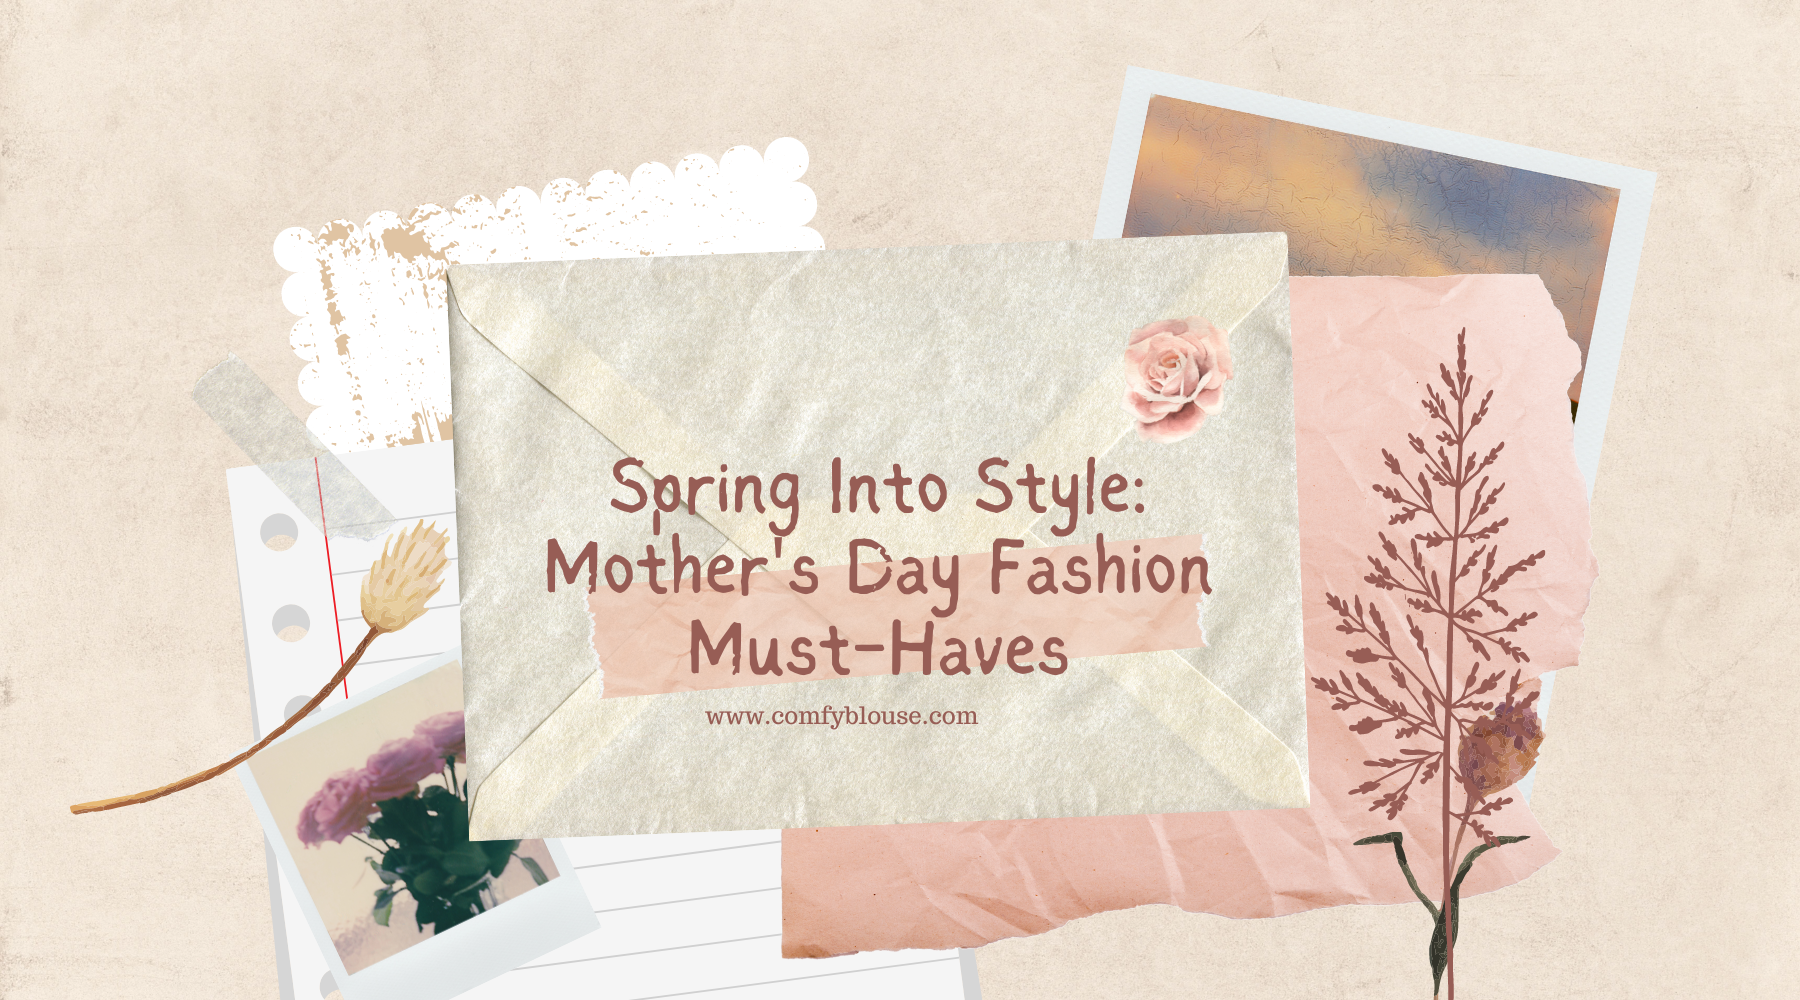 Spring Into Style: Mother's Day Fashion Must-Haves